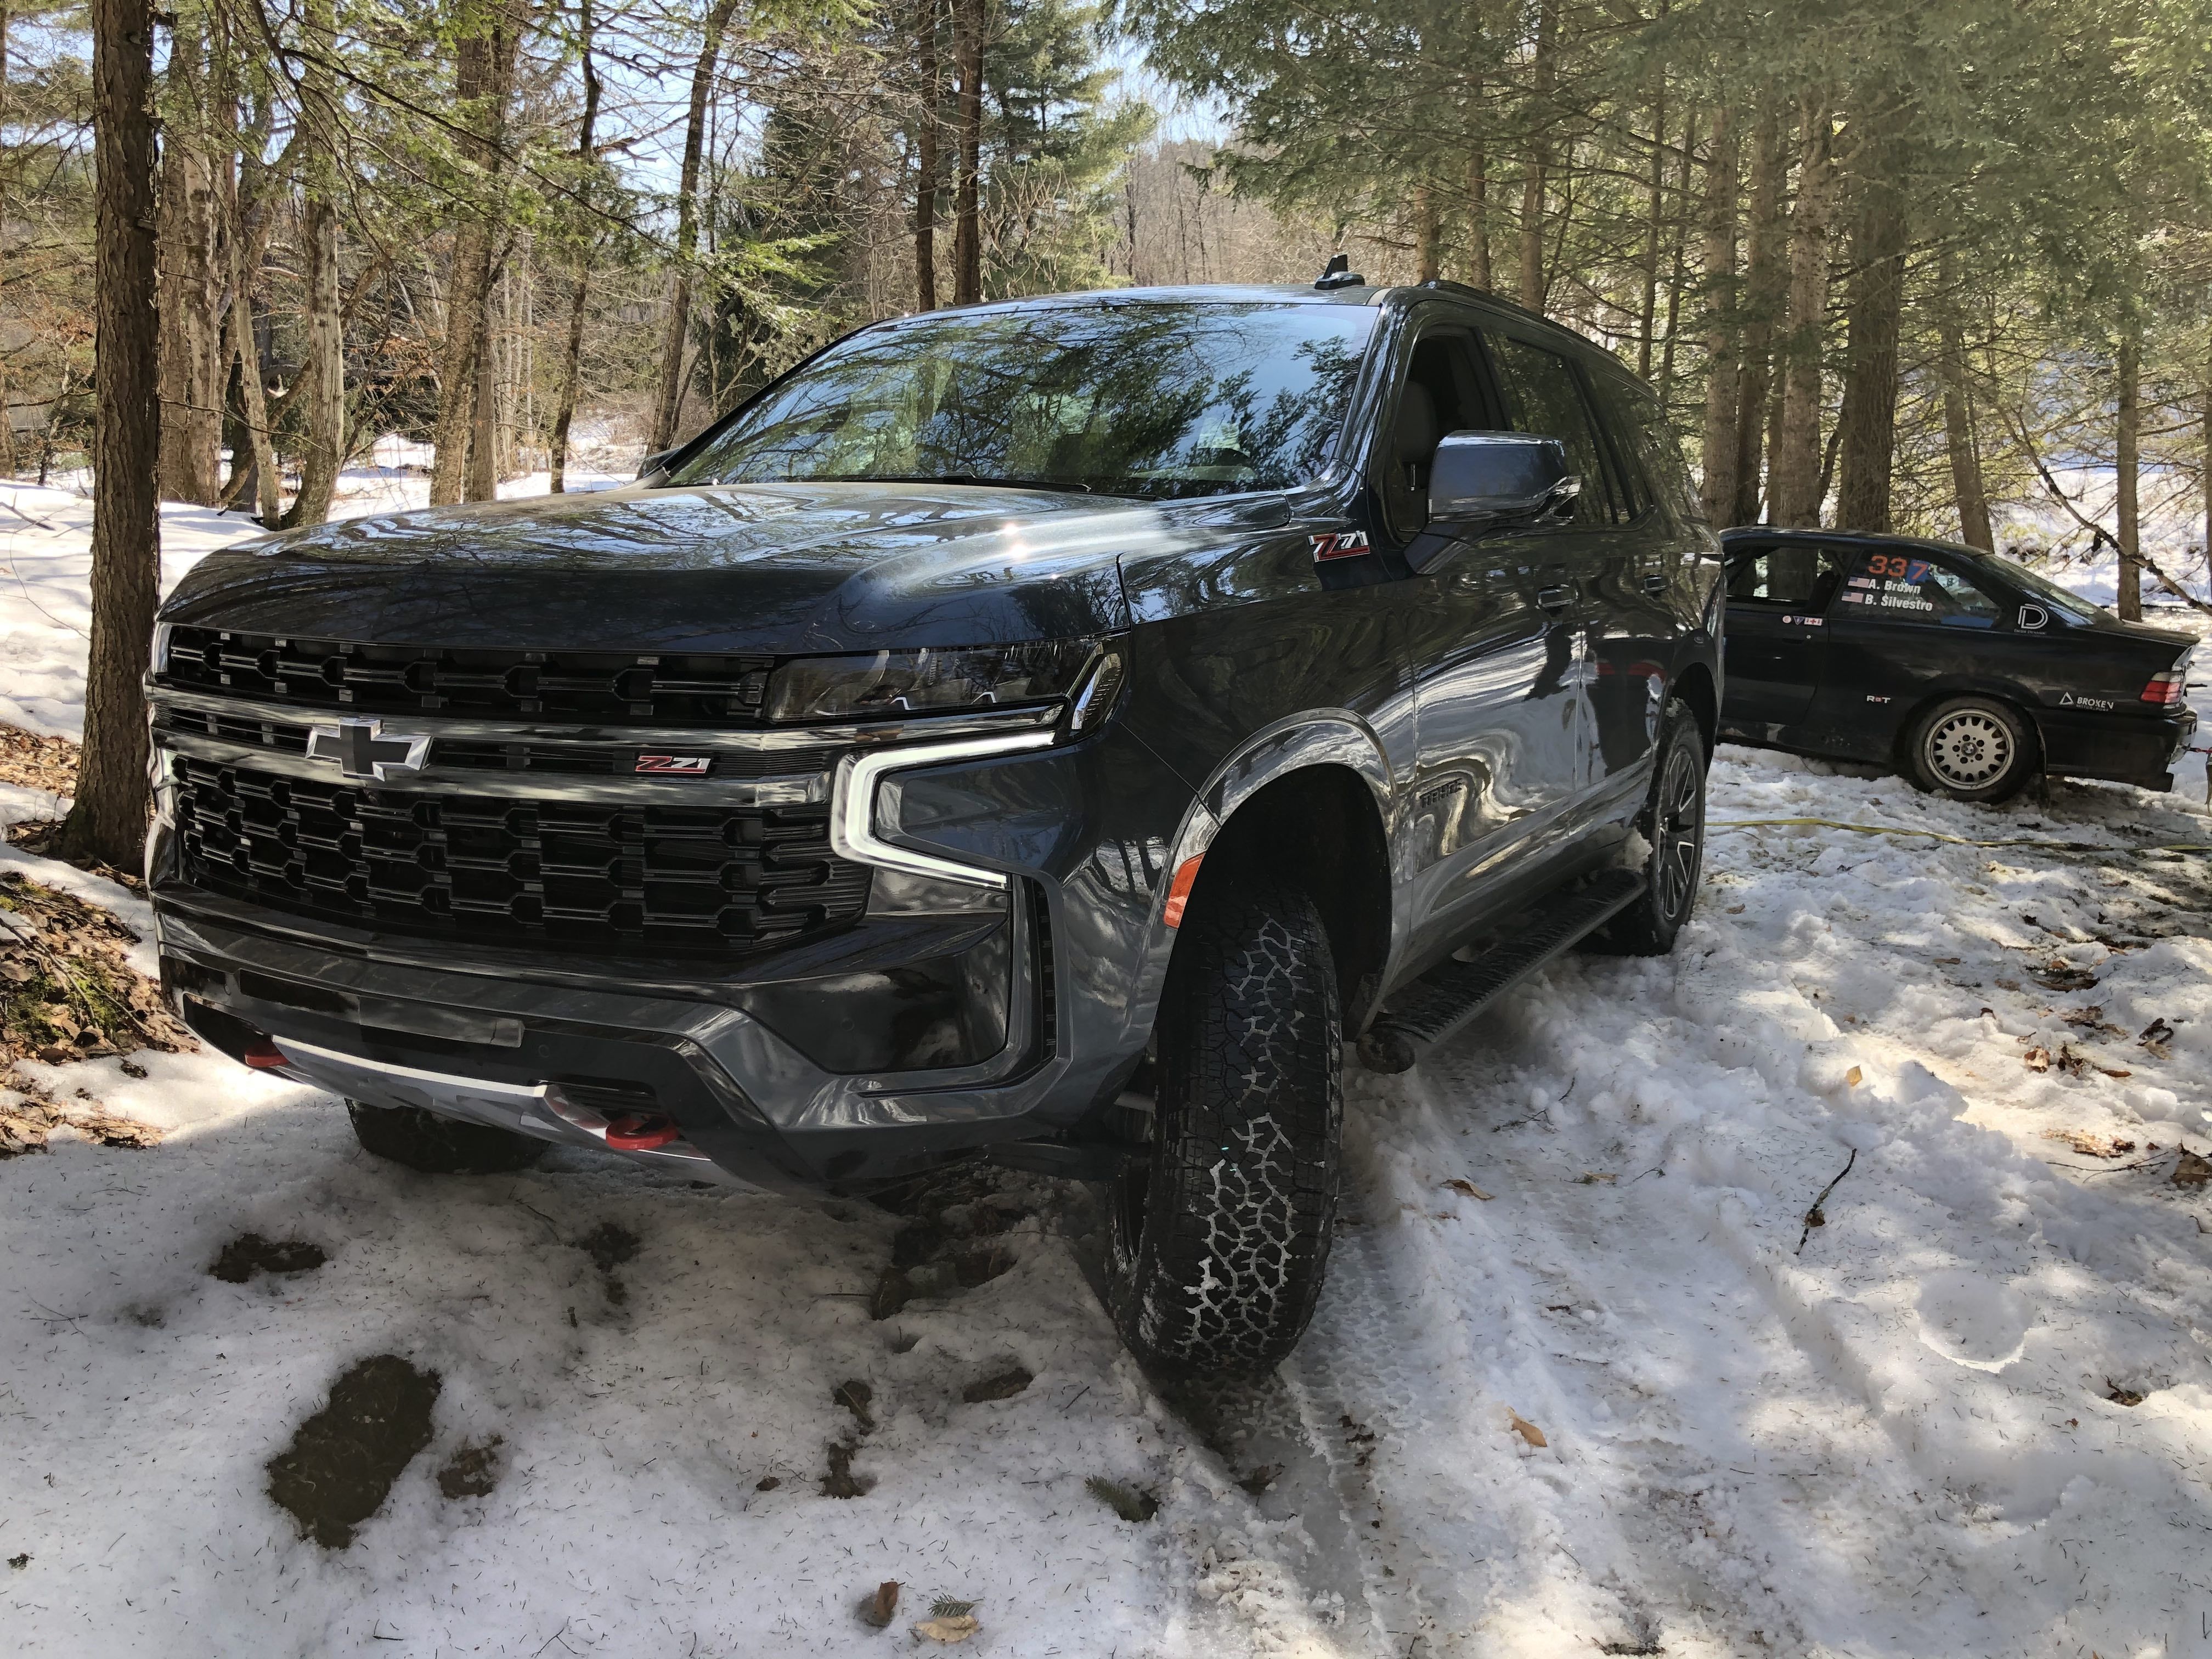 2021 Chevy Tahoe Z71 Makes for a Great Snow Recovery Rig